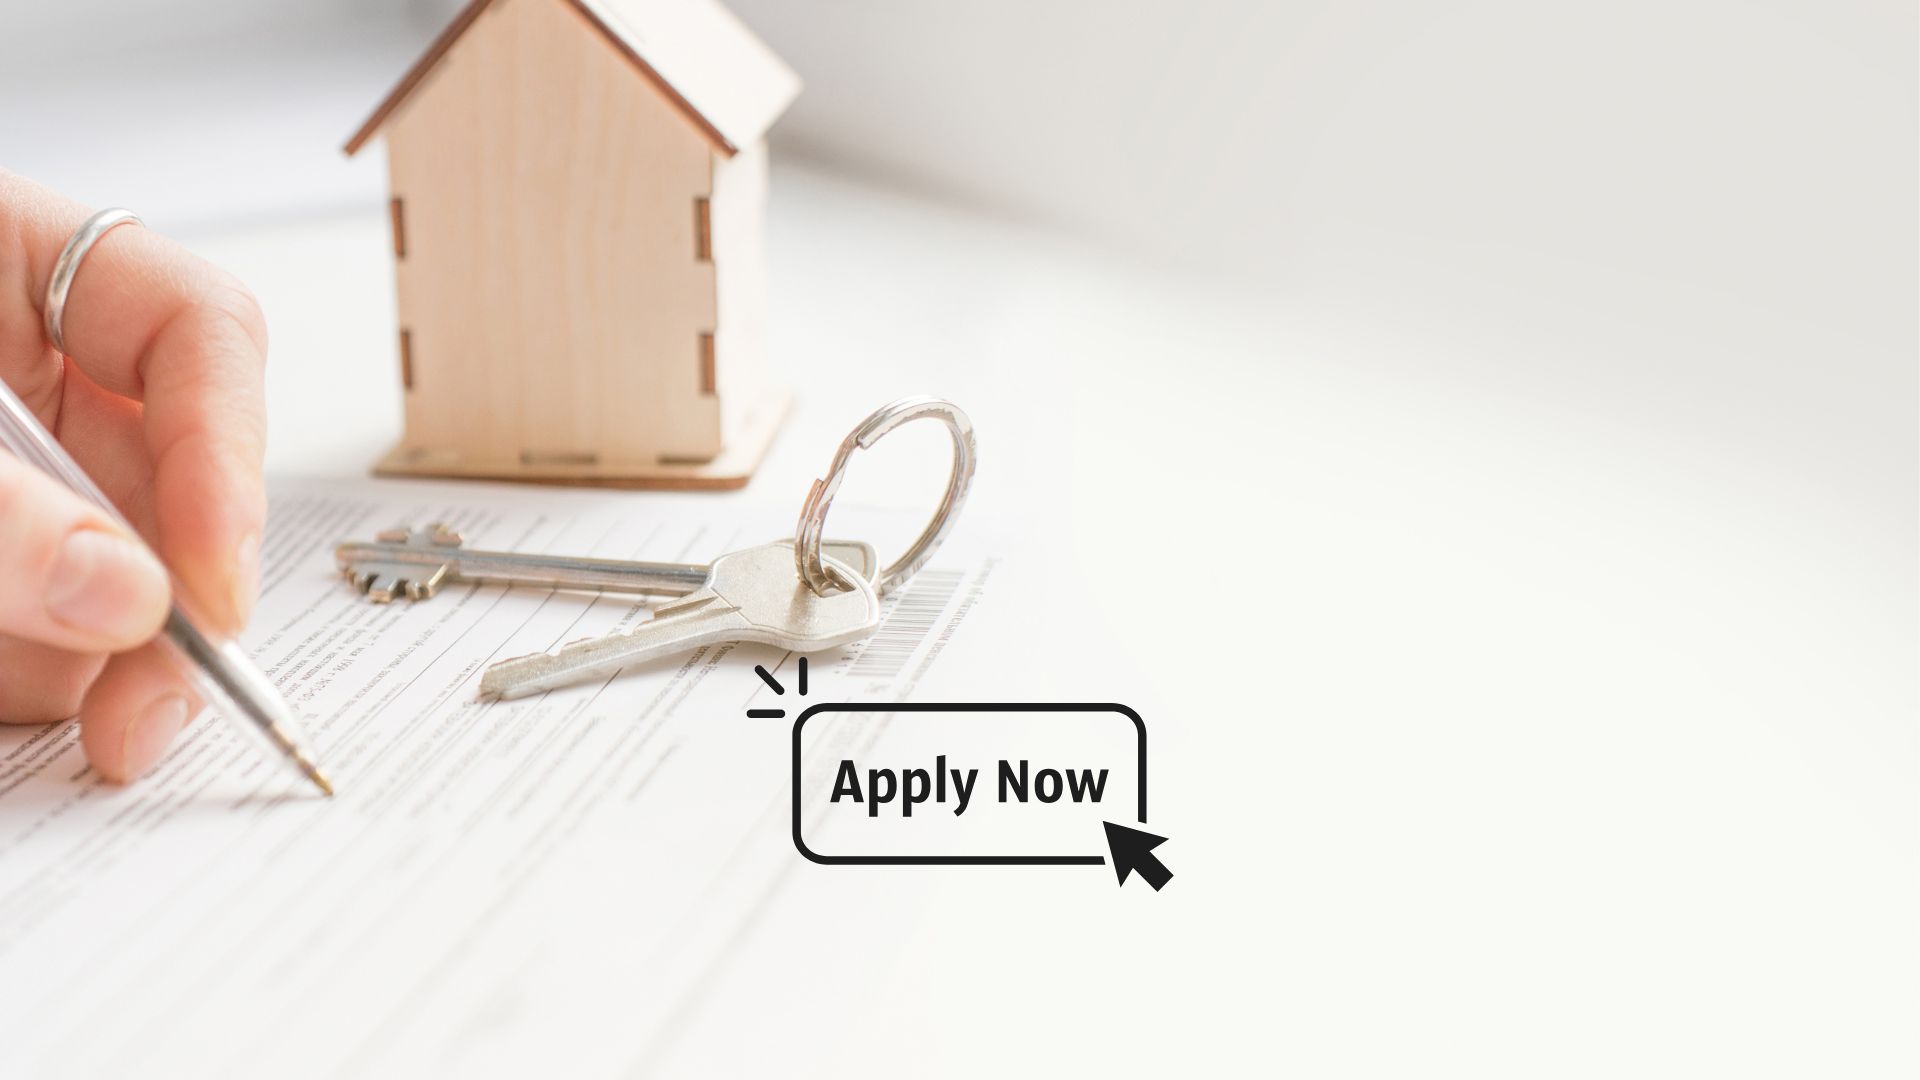 How to apply for a rental property